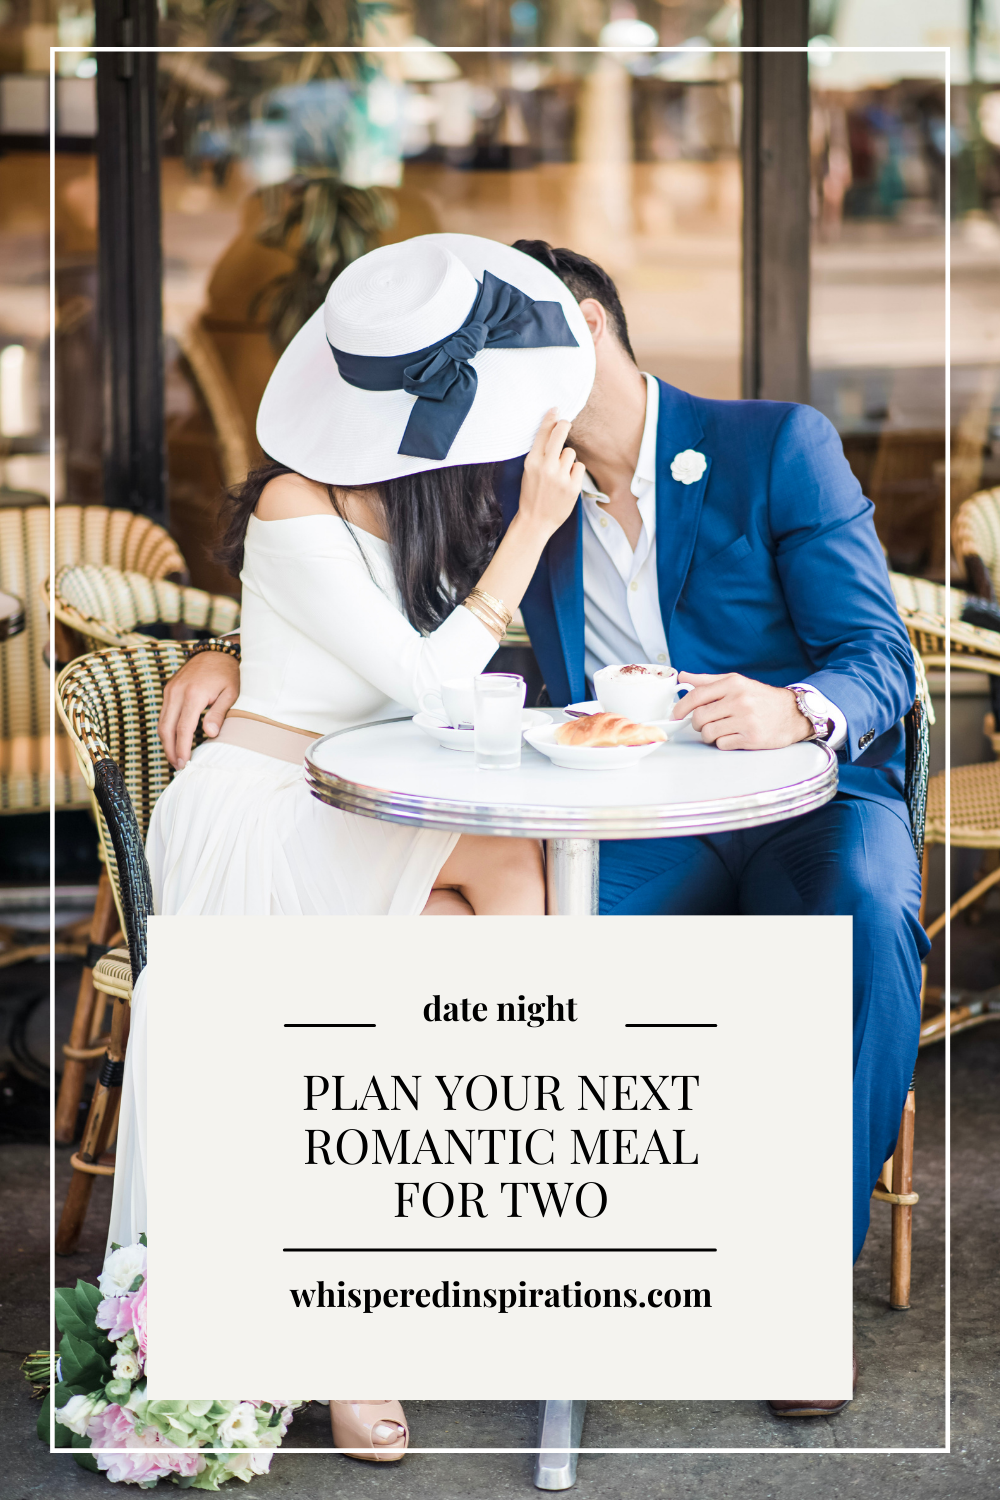 A man and woman kiss, their faces are hidden by the woman's hat. They sit in a bistro. This article covers how to plan a romantic meal for two.